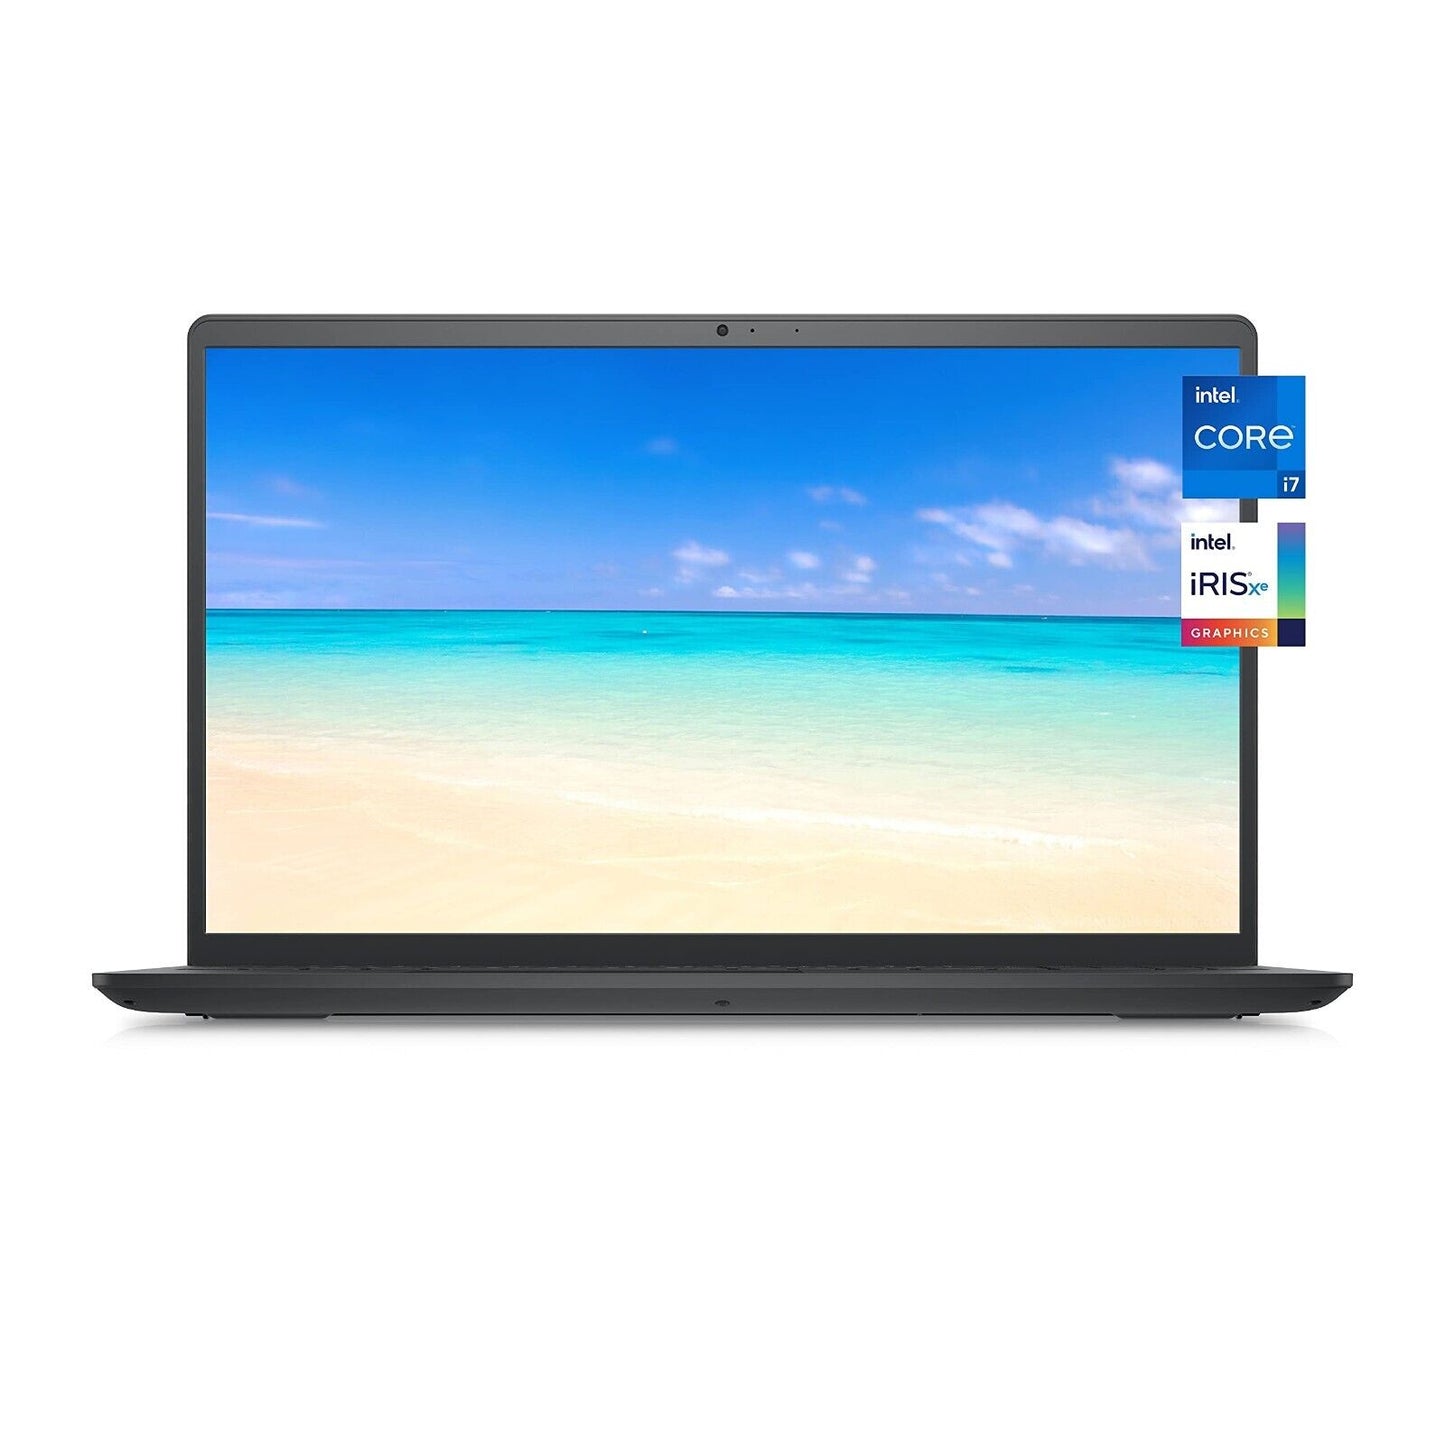 Dell Inspiron 3511 15.6" Intel Core i7 11th Gen 16GB 512GB SSD - SCRATCHED